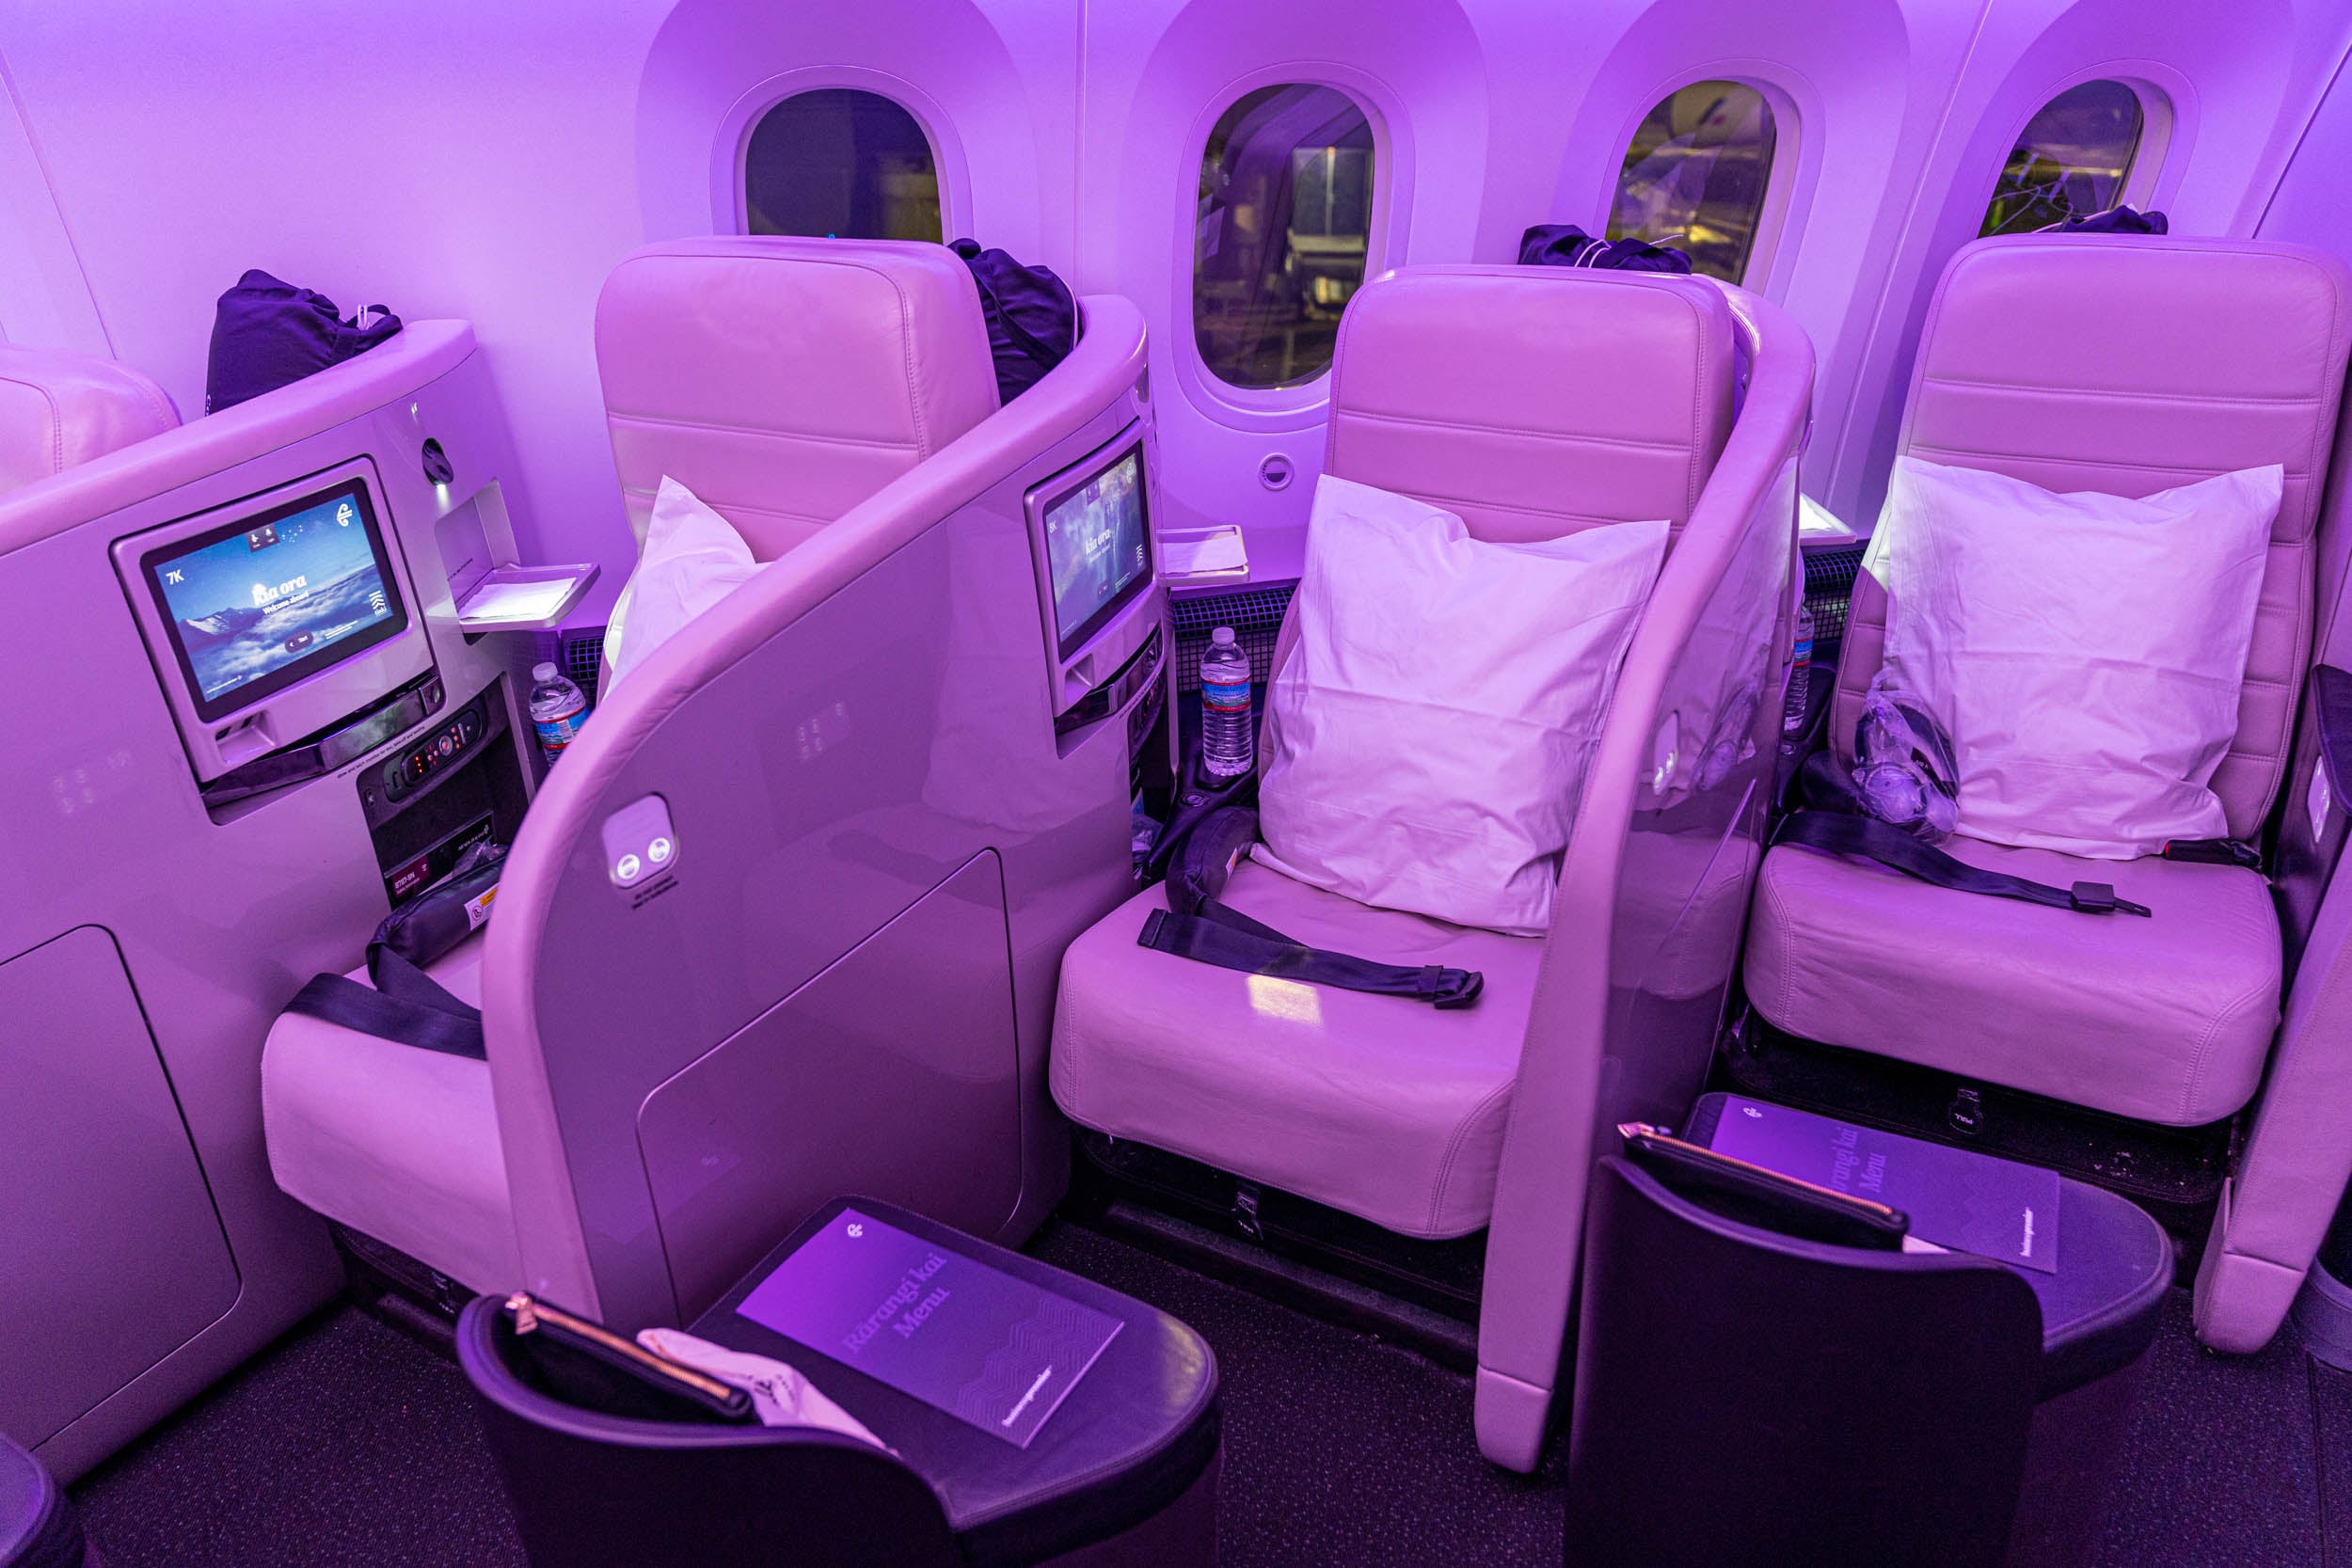 Onboard Air New Zealand's inaugural flight from NYC to Auckland, the world's 4th..